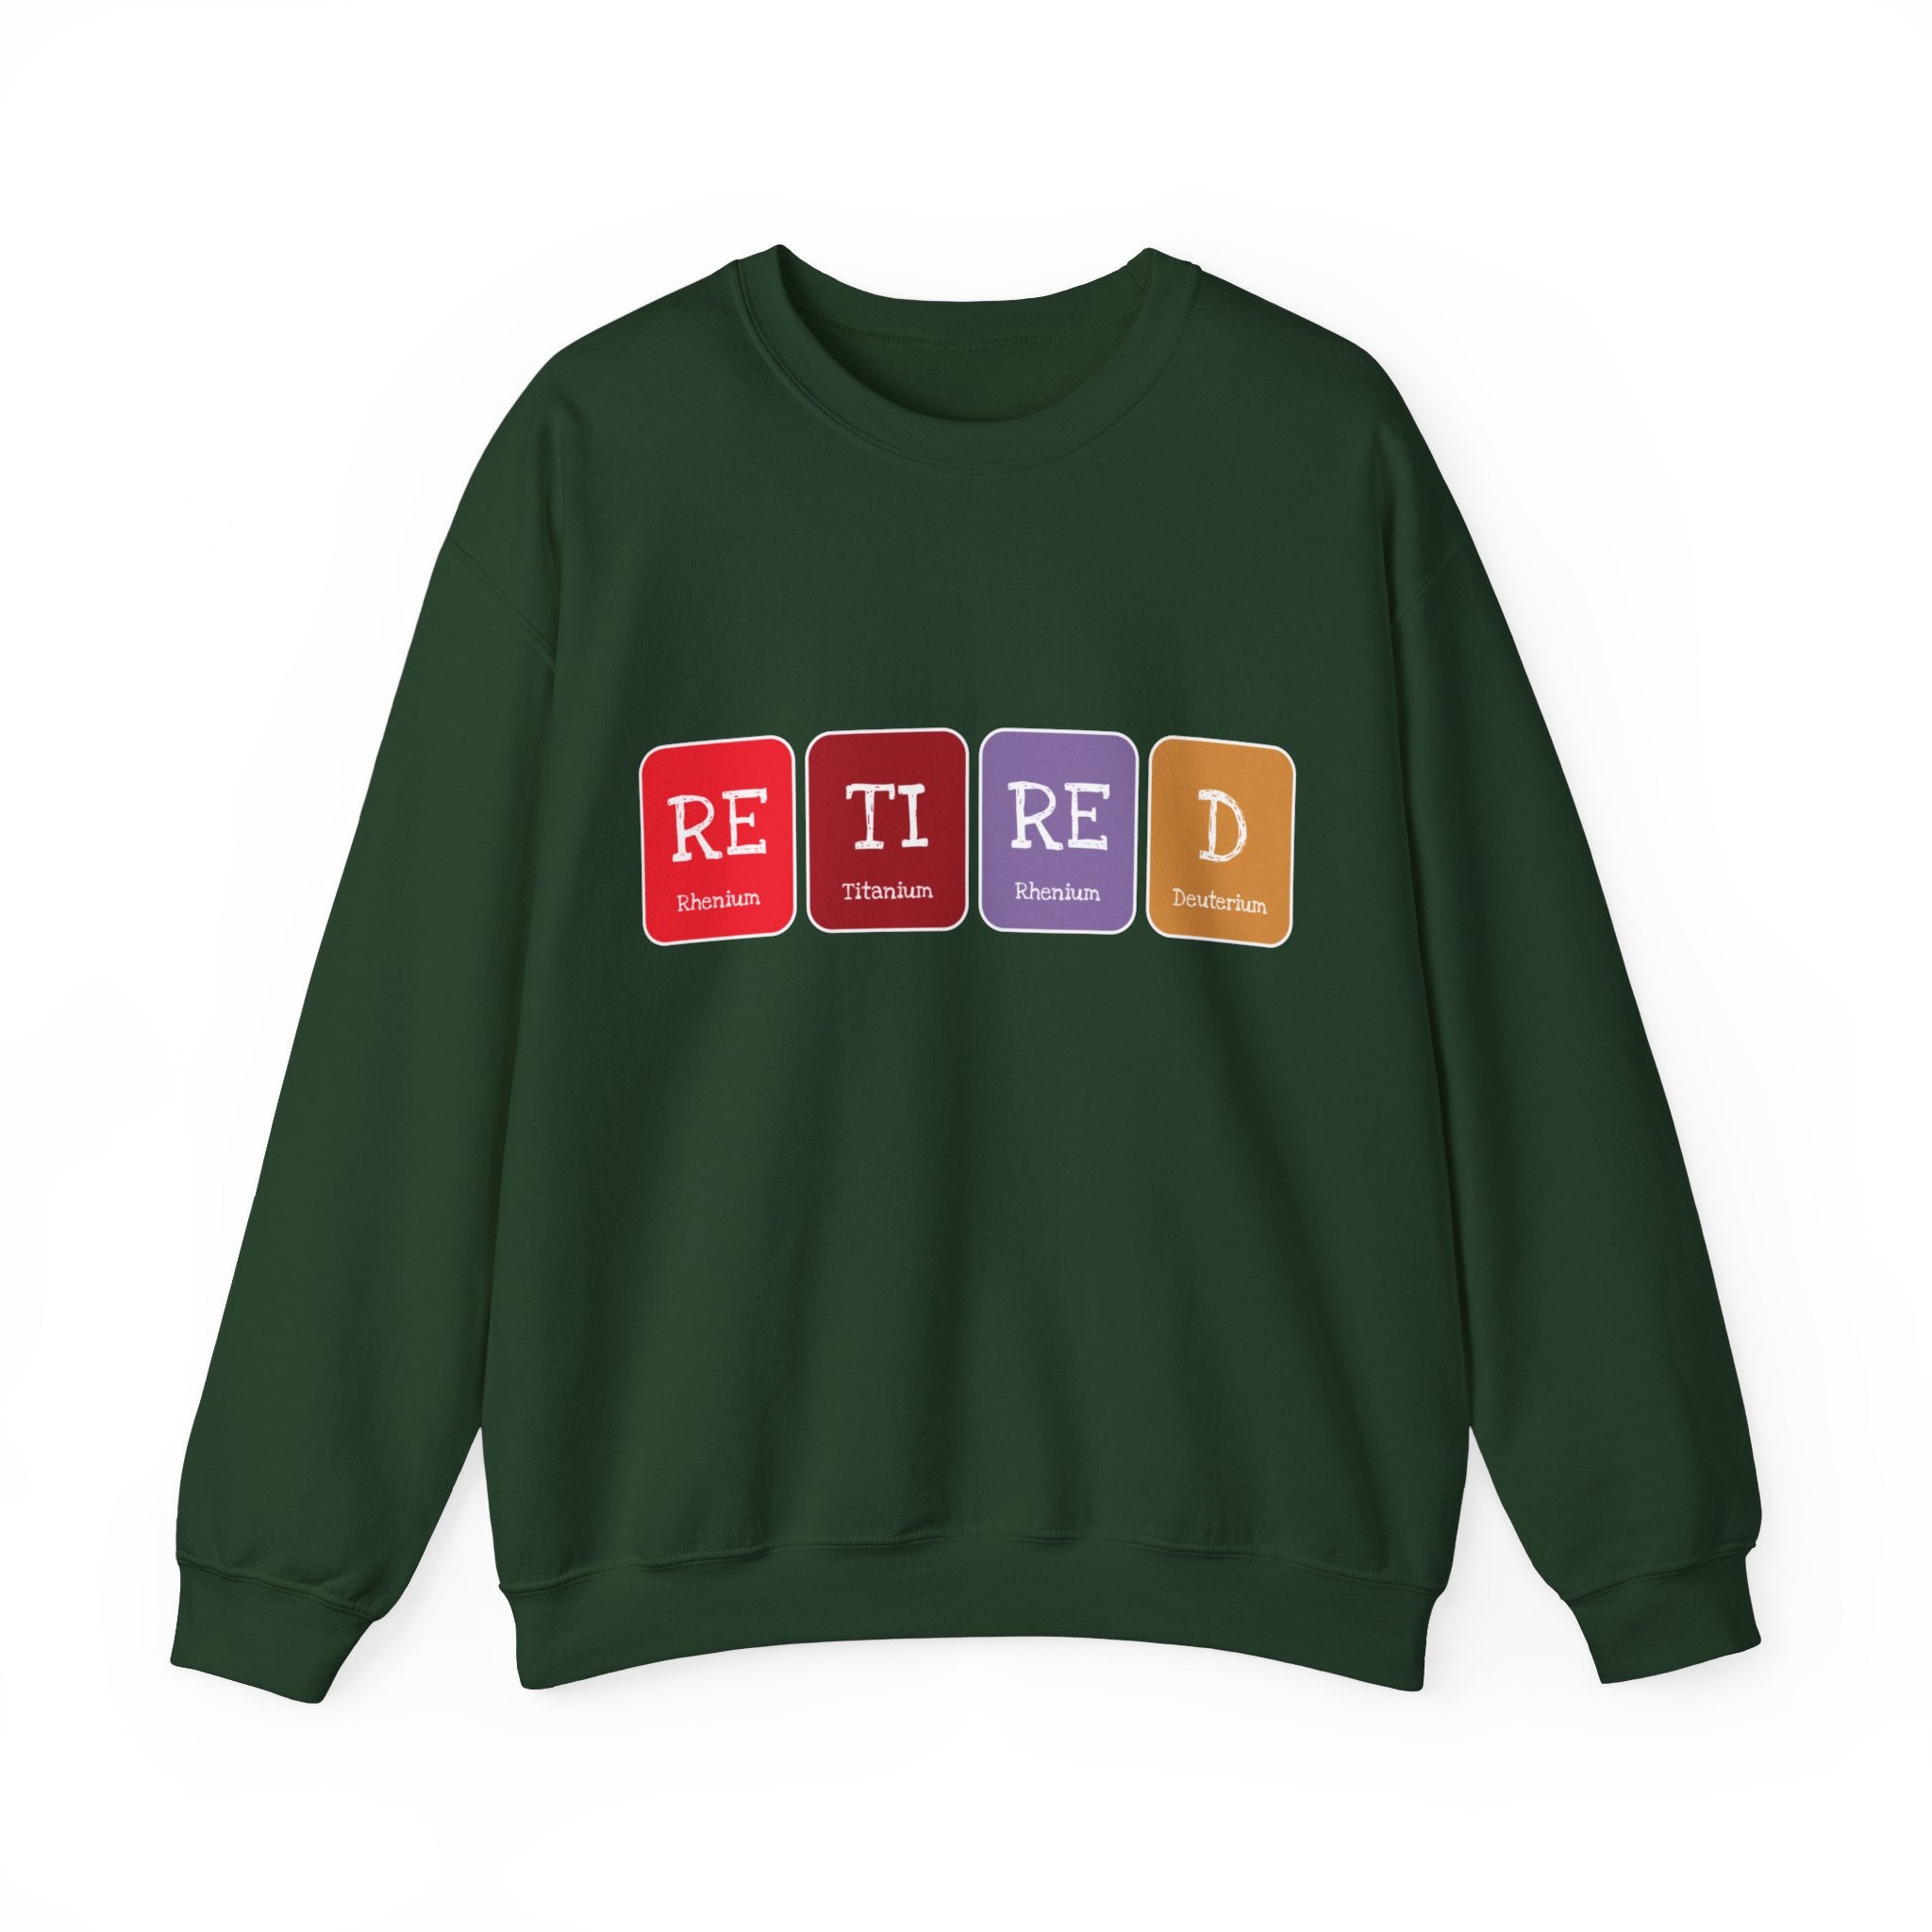 A dark green Retired - Sweatshirt with the word "RETIRED" displayed across the chest in bright, color-coded rectangles. Each letter has a different color background, adding a touch of comfort and elegance to your relaxed wardrobe.